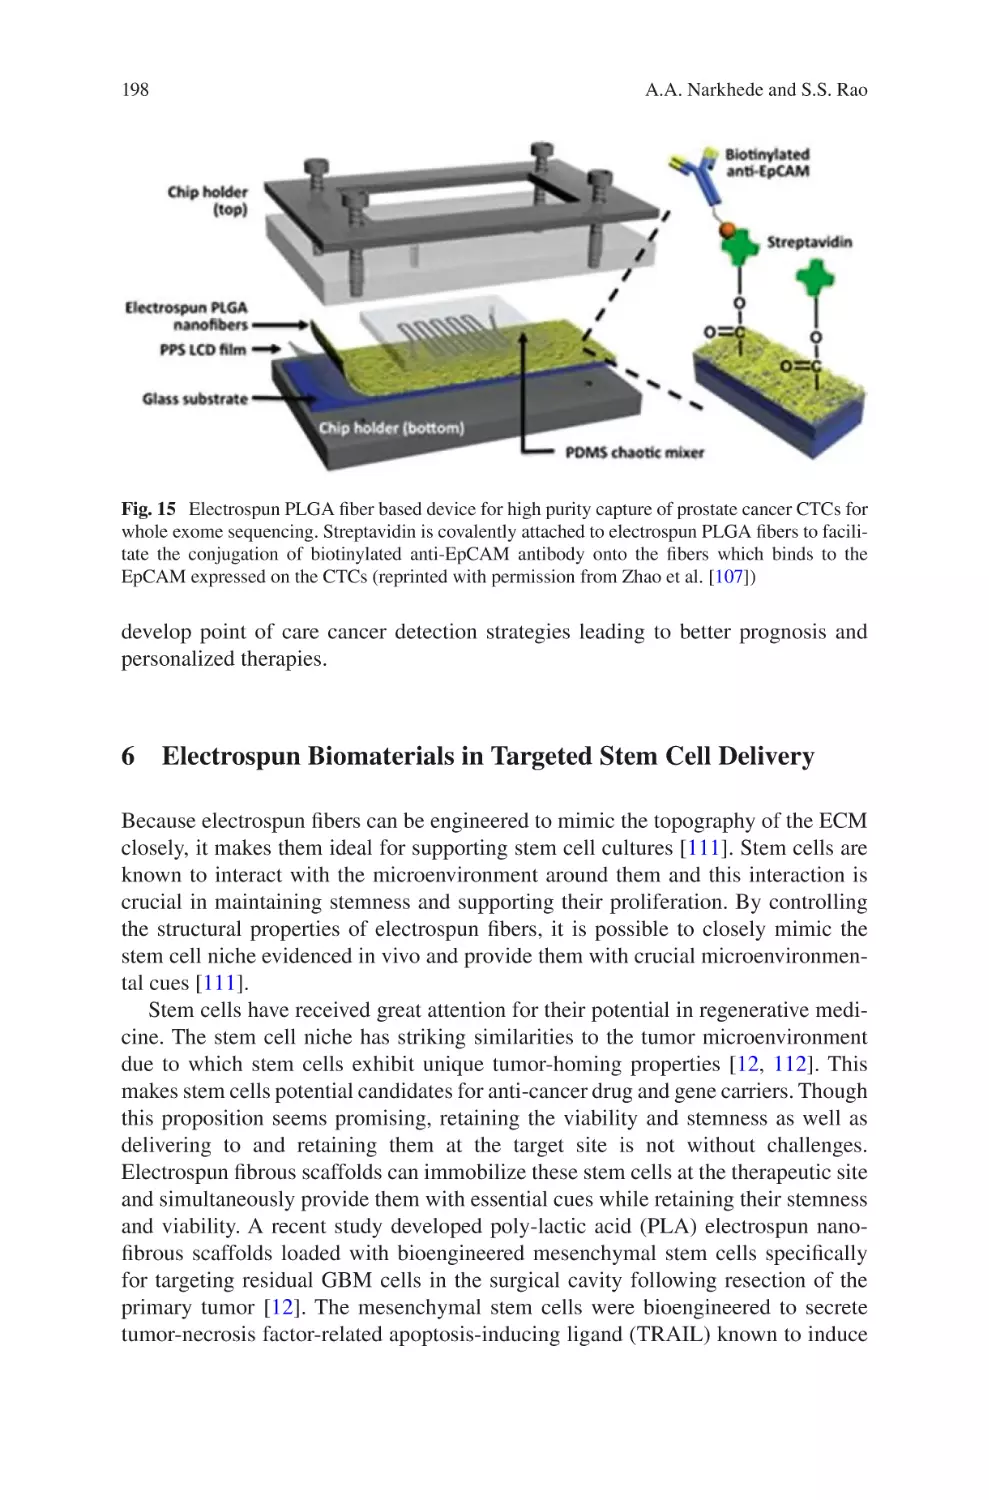 6 Electrospun Biomaterials in Targeted Stem Cell Delivery